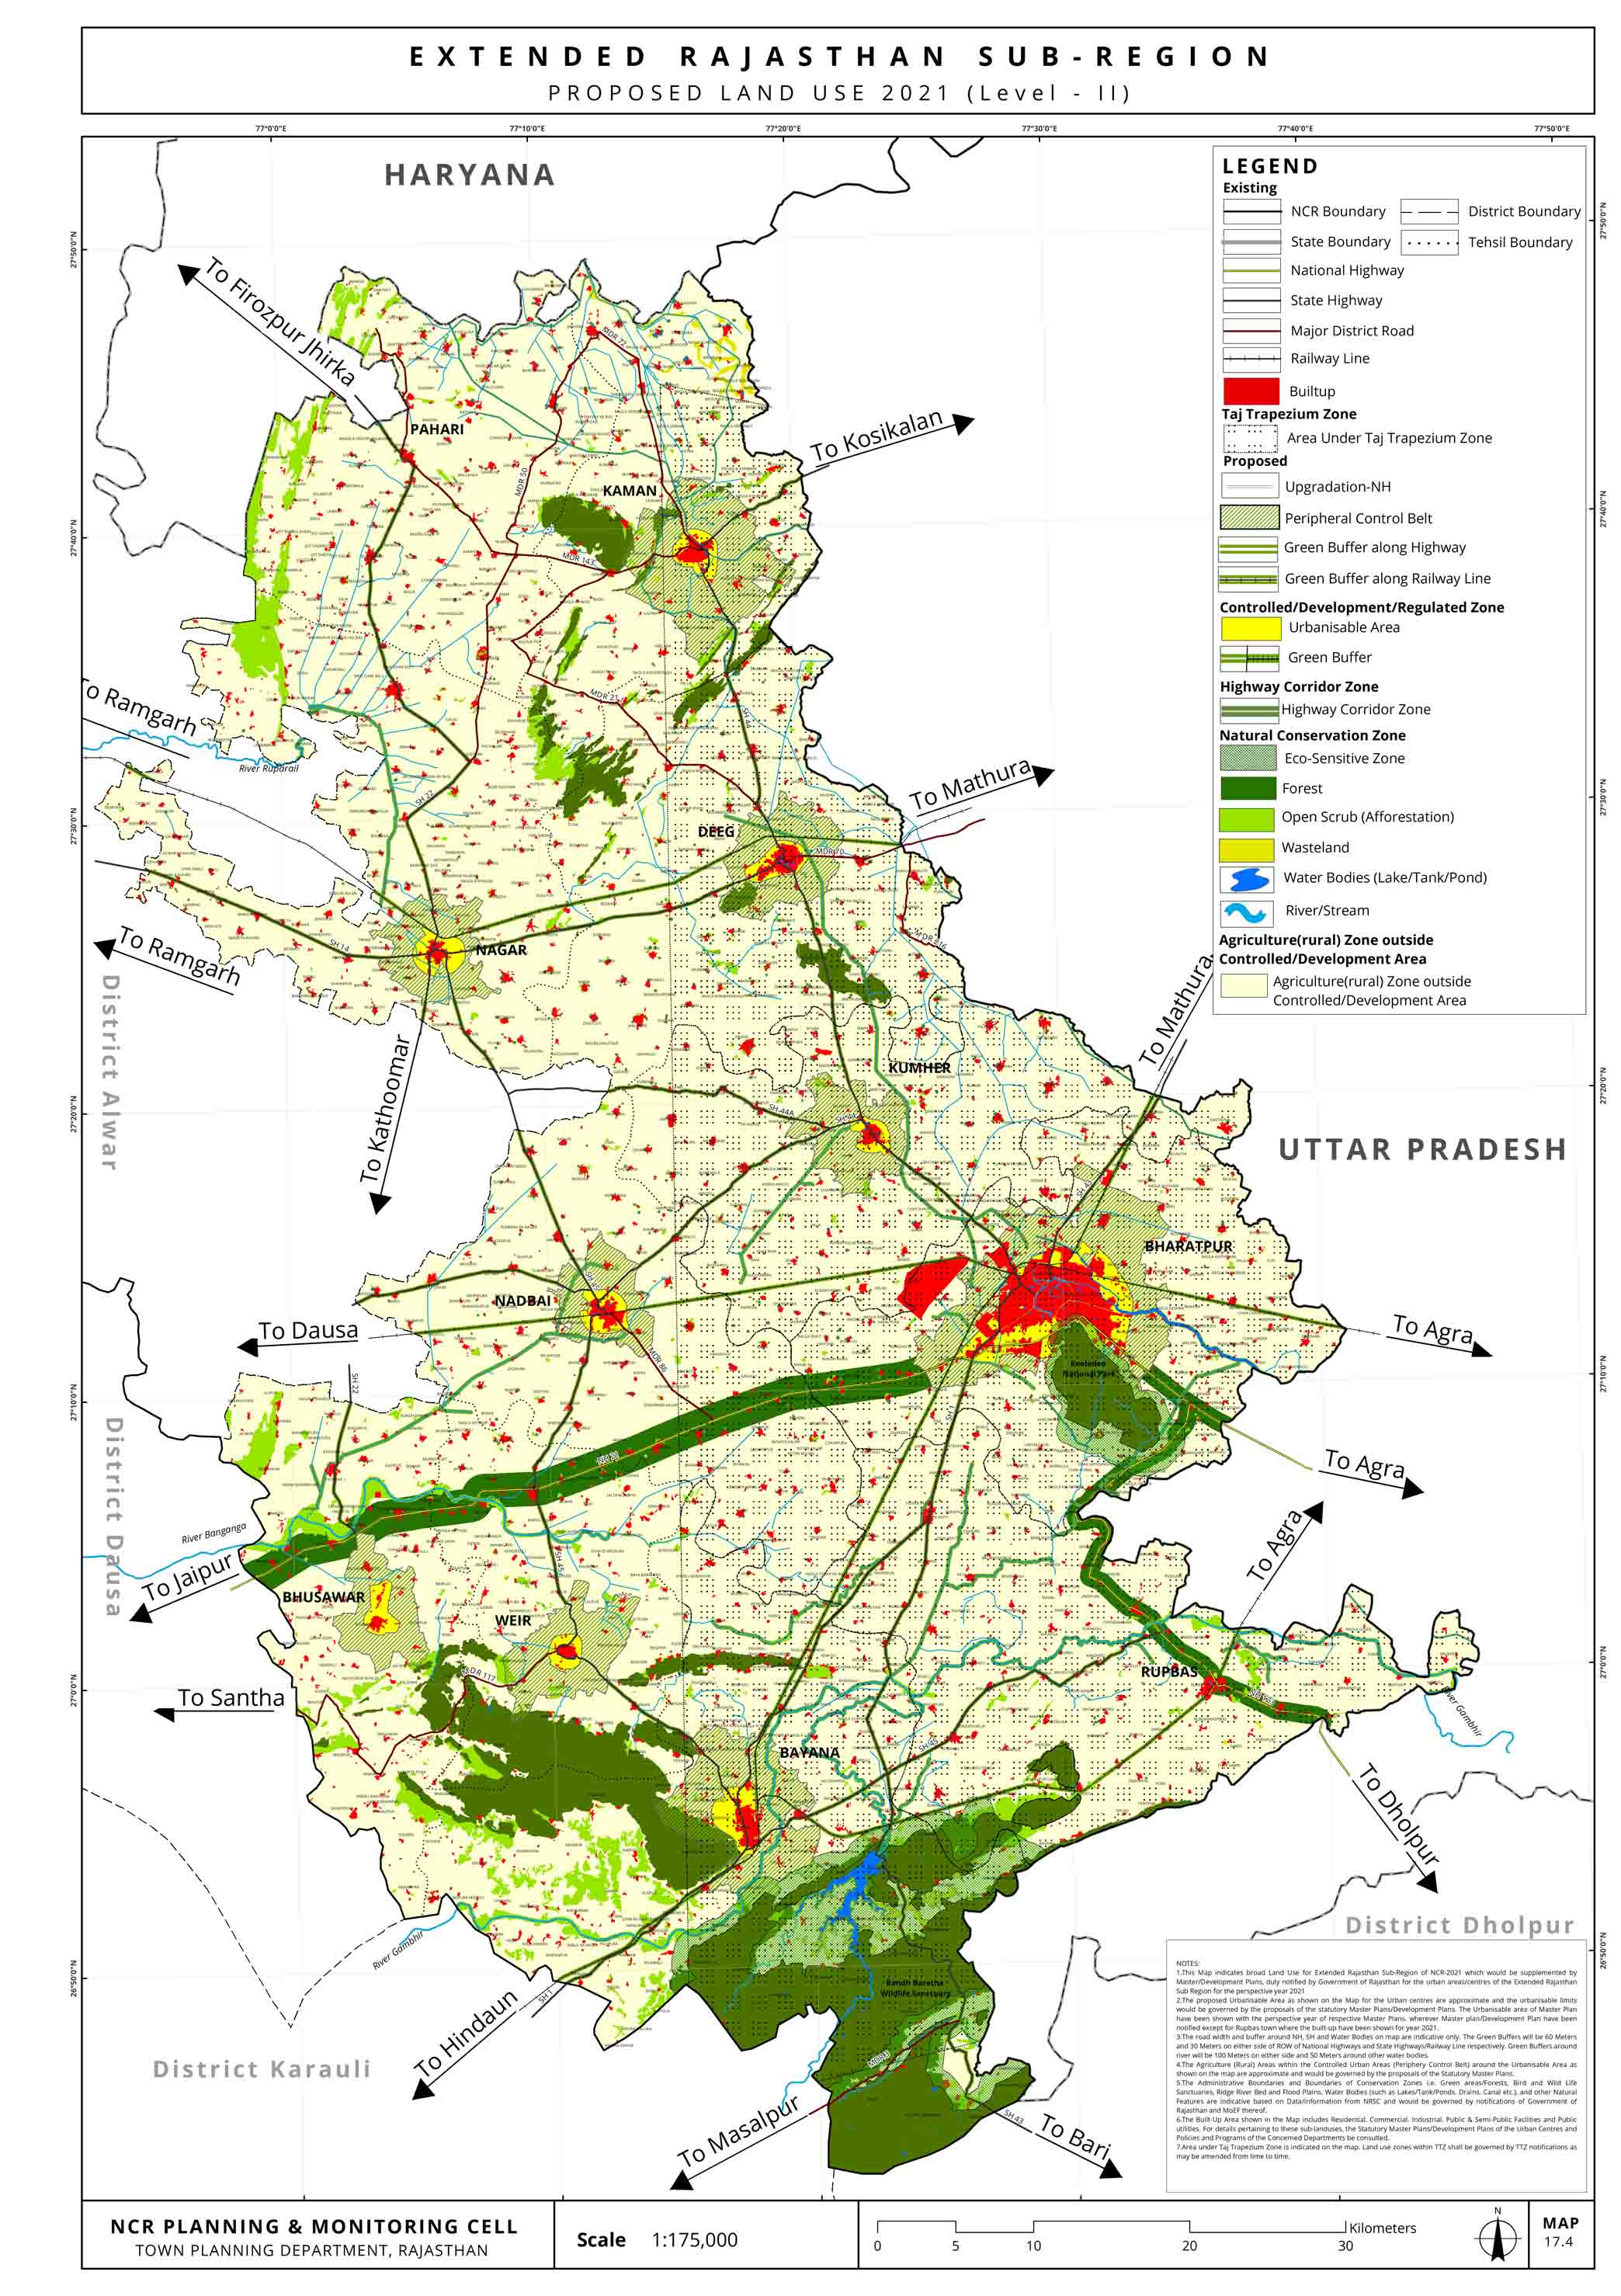 Final land use map of Bharatpur